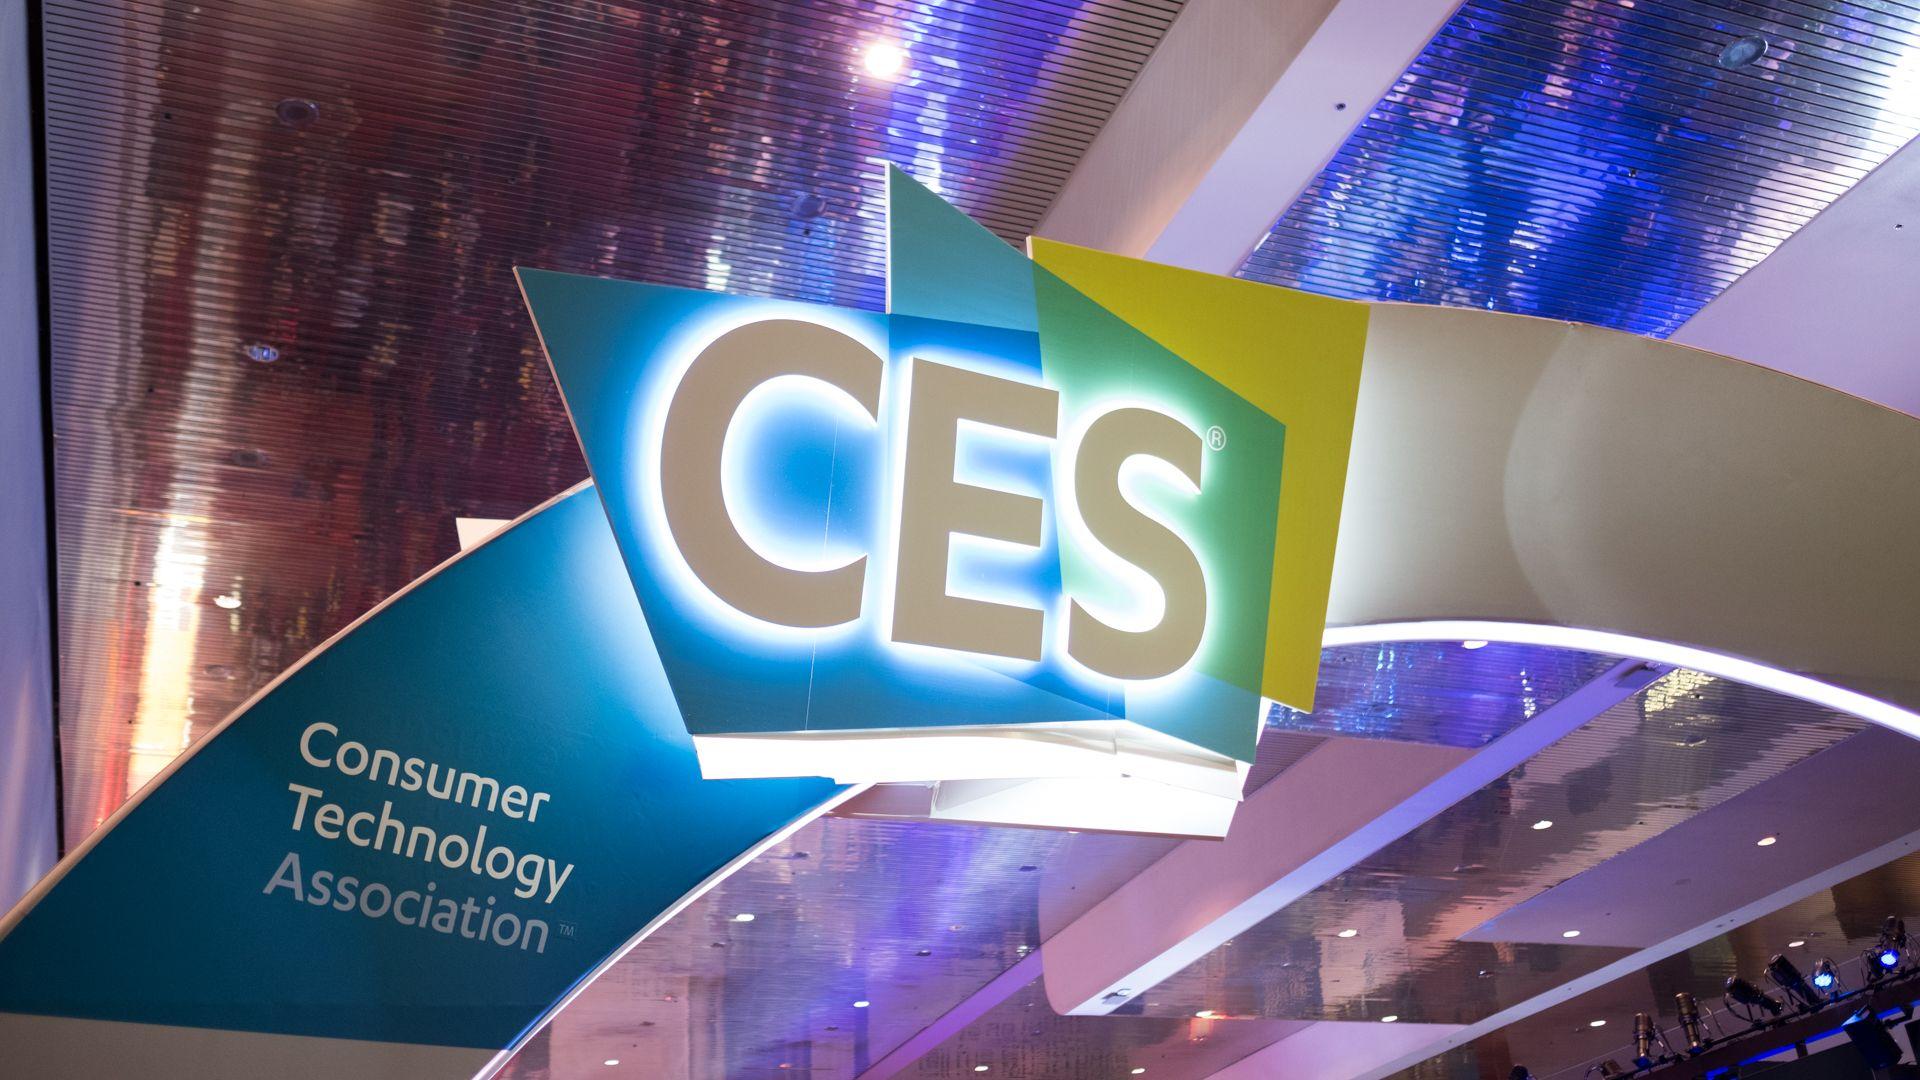 CES 2019: what to expect from the world's biggest annual tech event